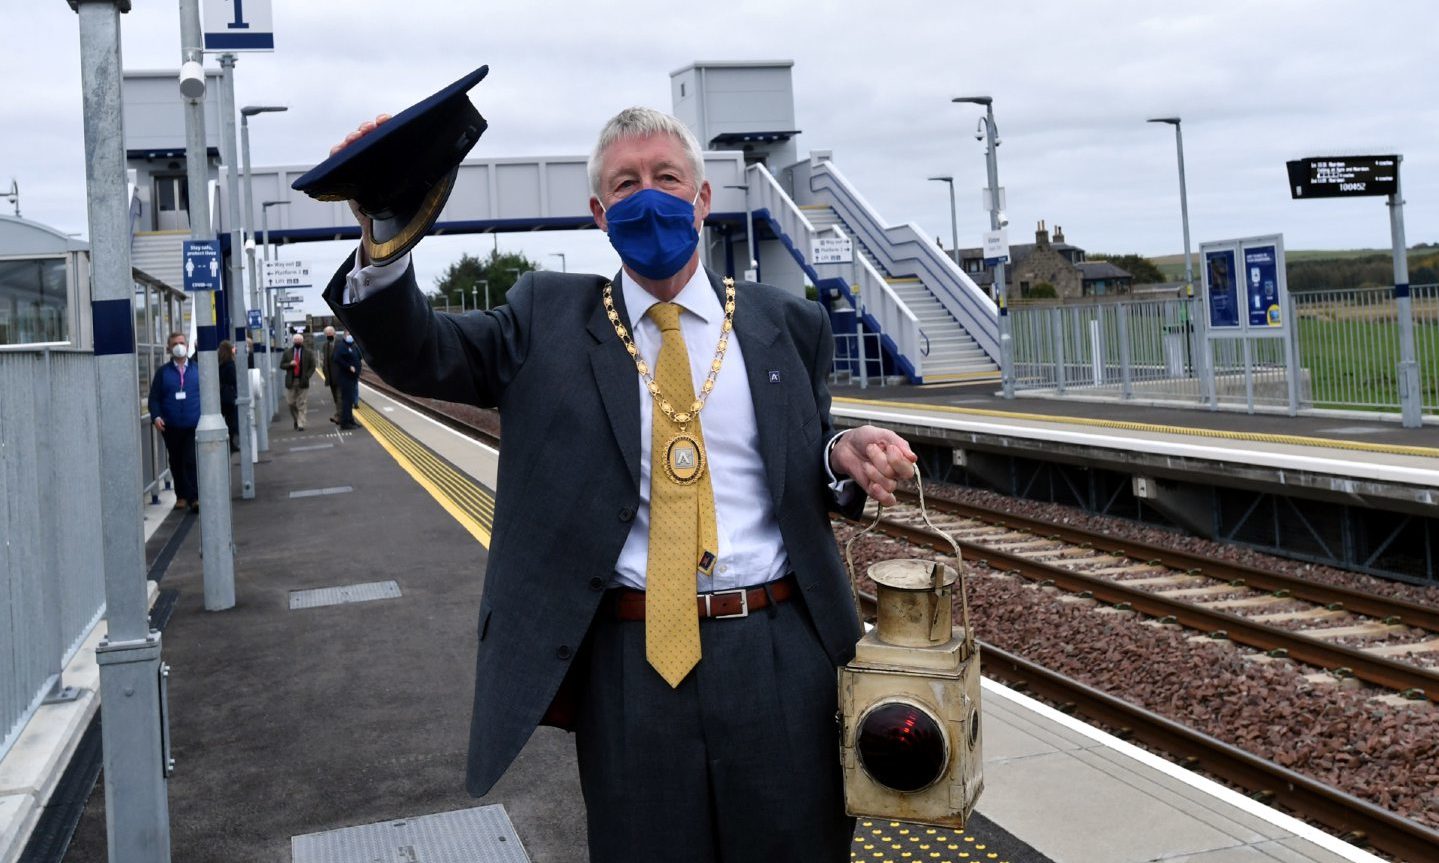 Aberdeenshire Provost Bill Howatson is pictured at Kintore station, which has contributed to the increase in Aberdeen train passenger numbers.